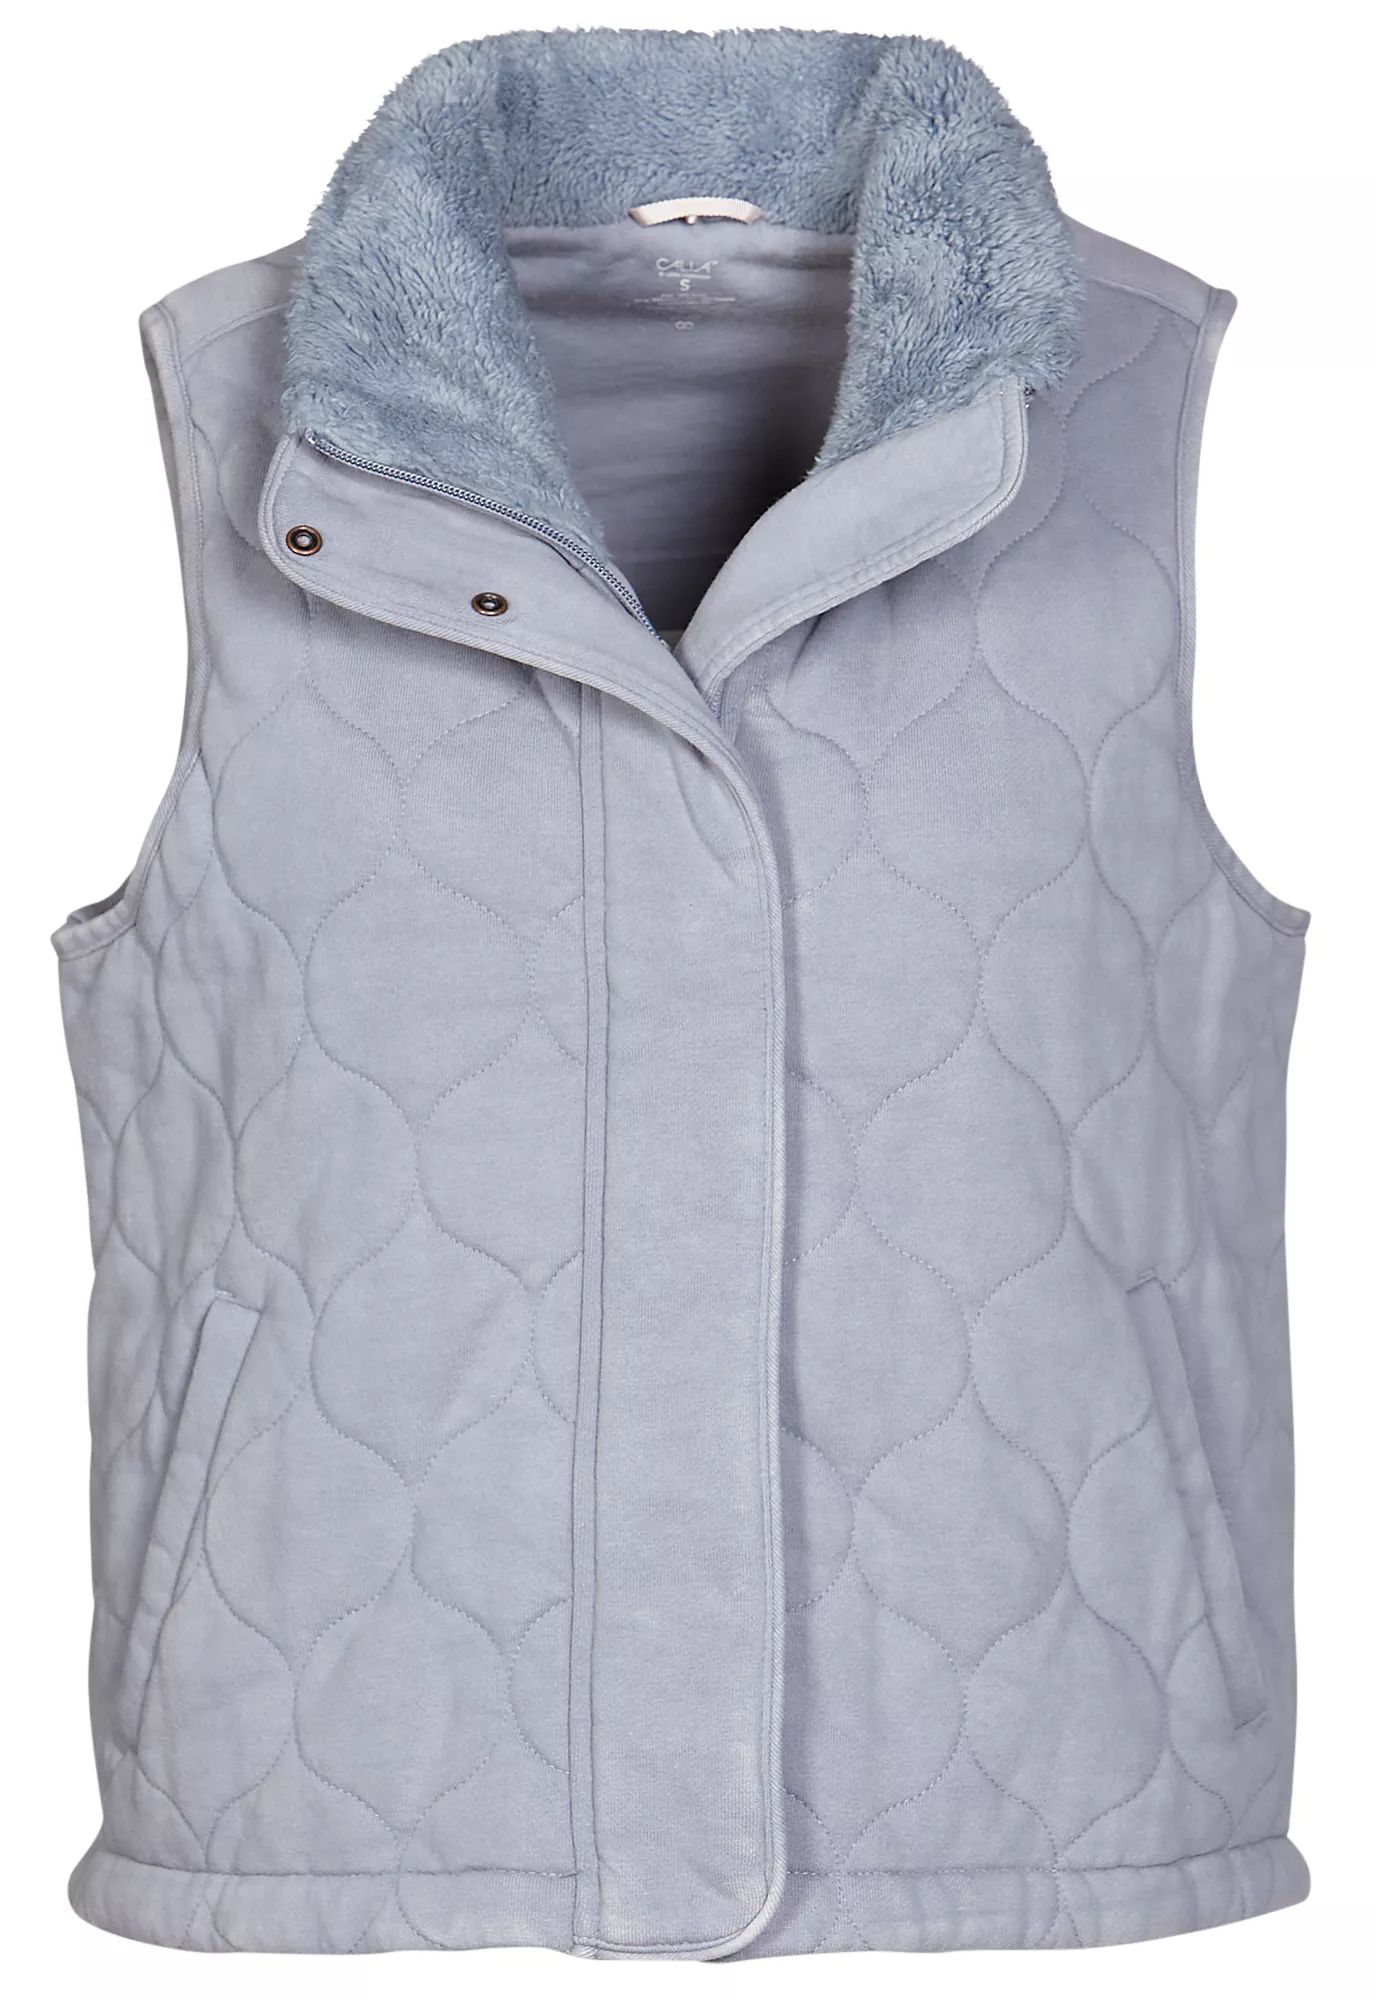 CALIA Women's Quilted Vest | Dick's Sporting Goods